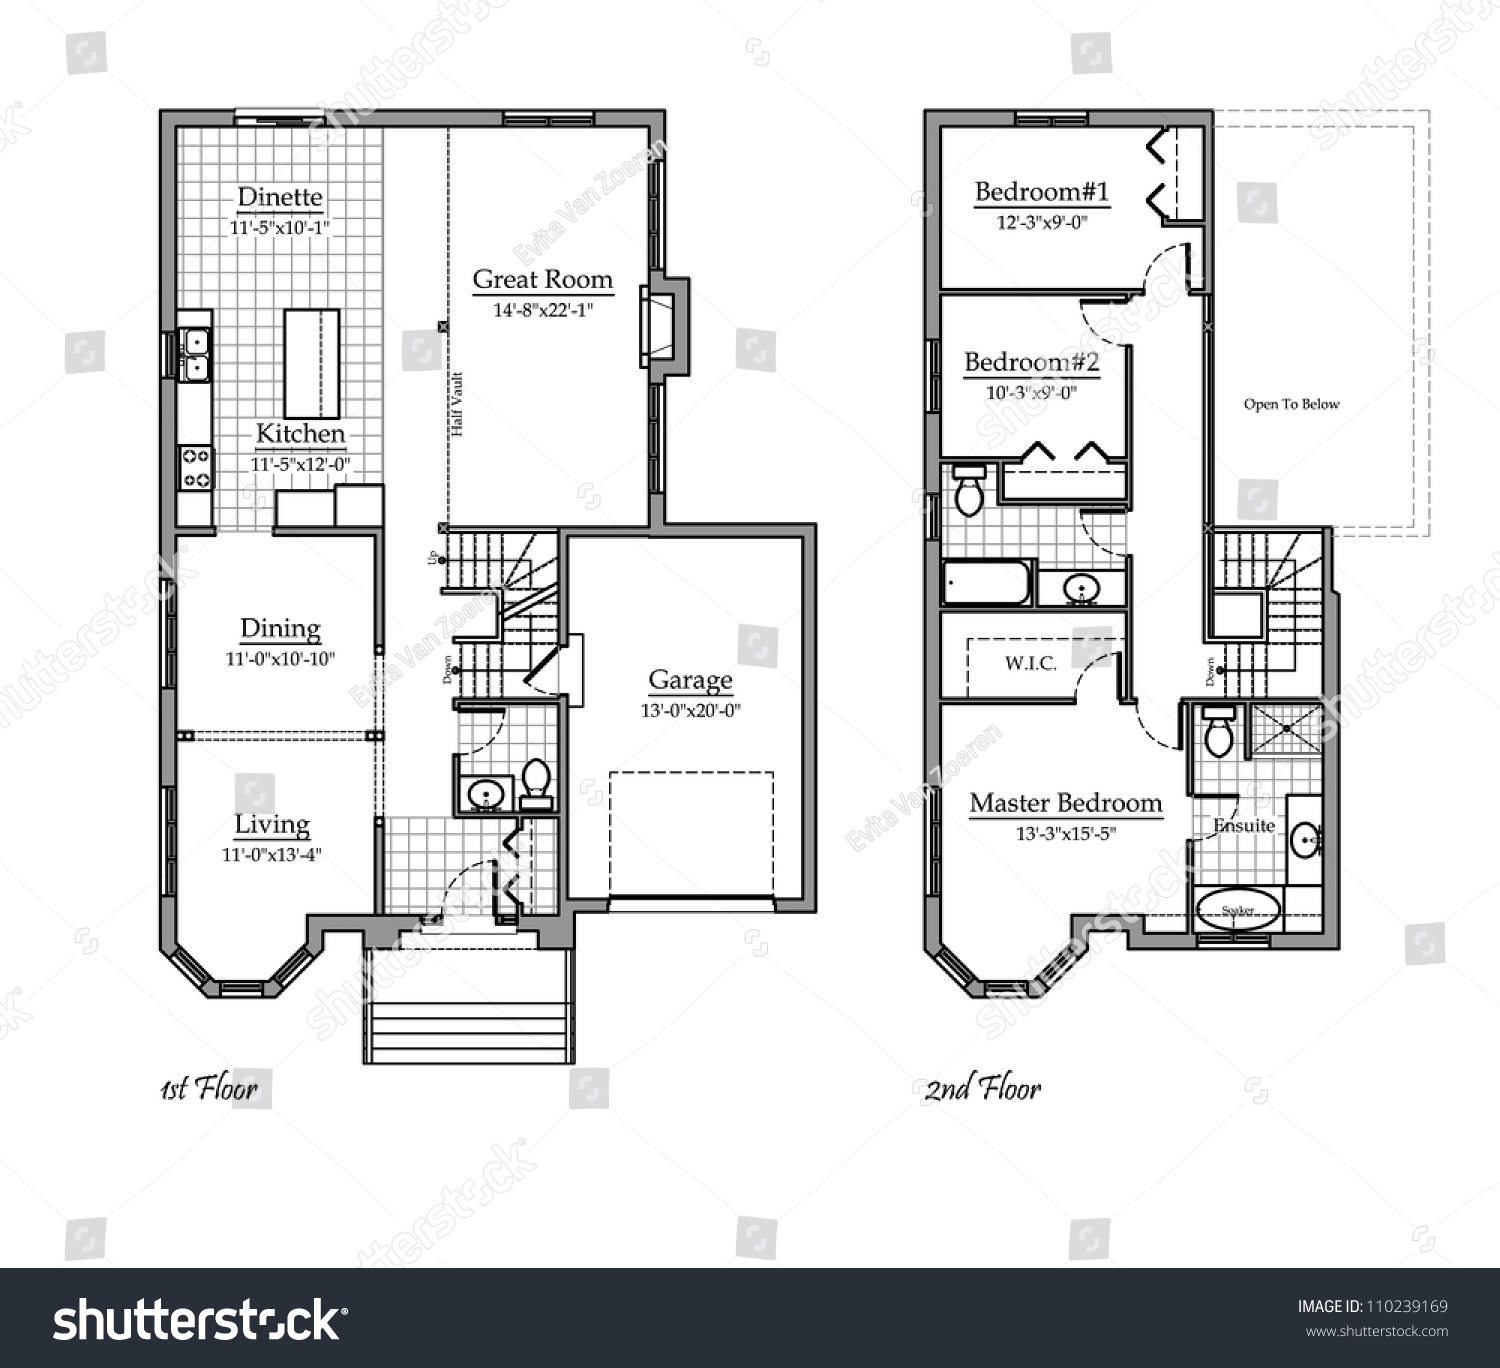 Two Storey Floor Plan With Room Names Stock Photo